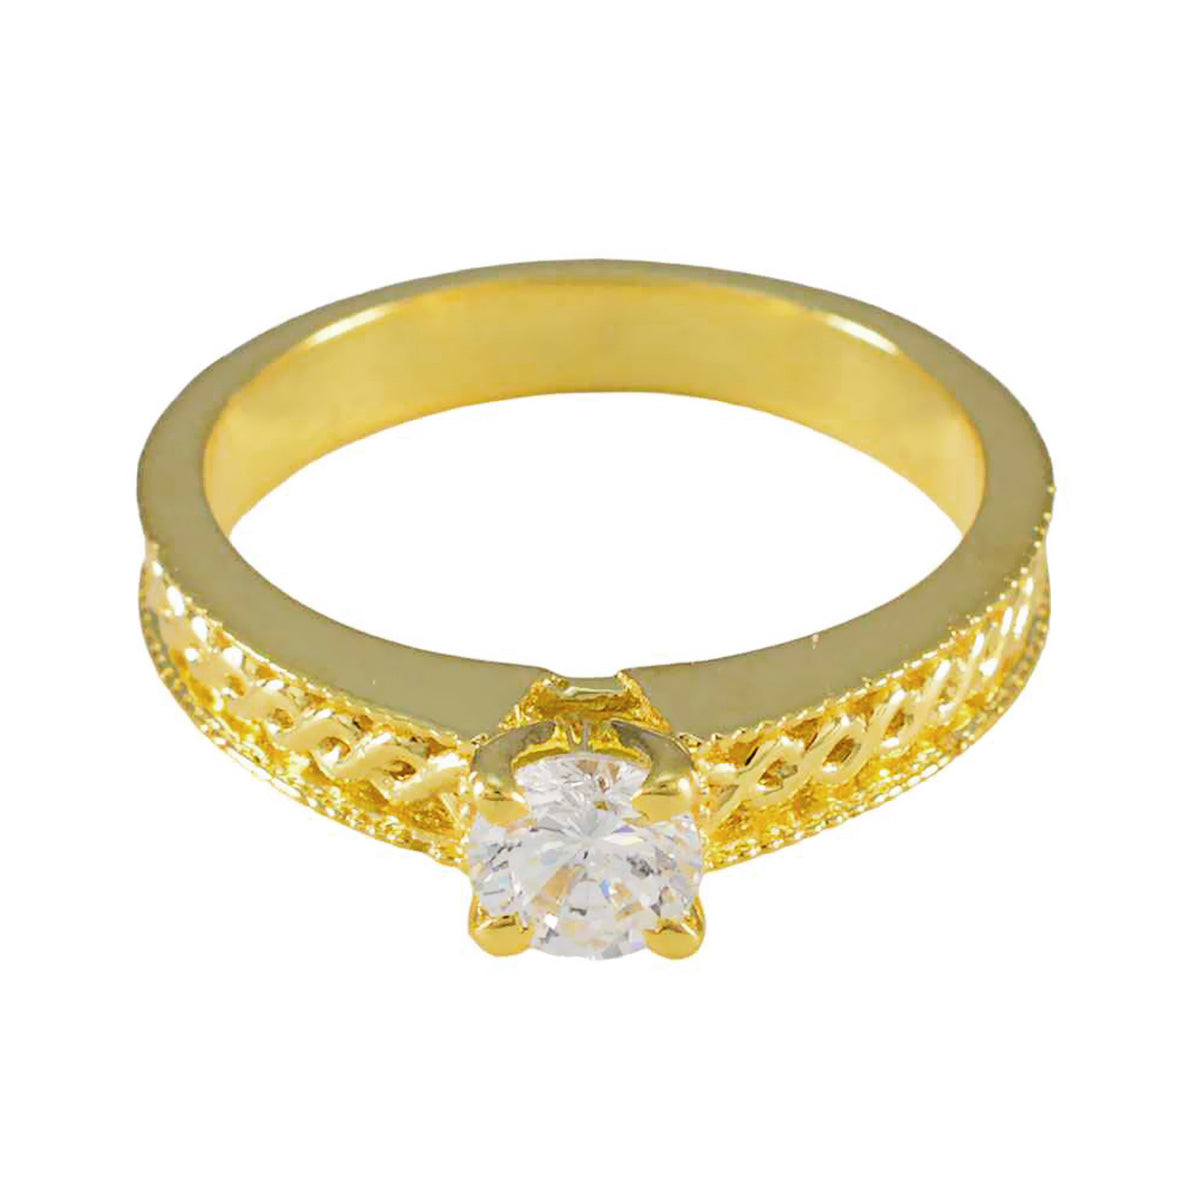 Riyo In Quantity Silver Ring With Yellow Gold Plating White CZ Stone Round Shape Prong Setting Ring